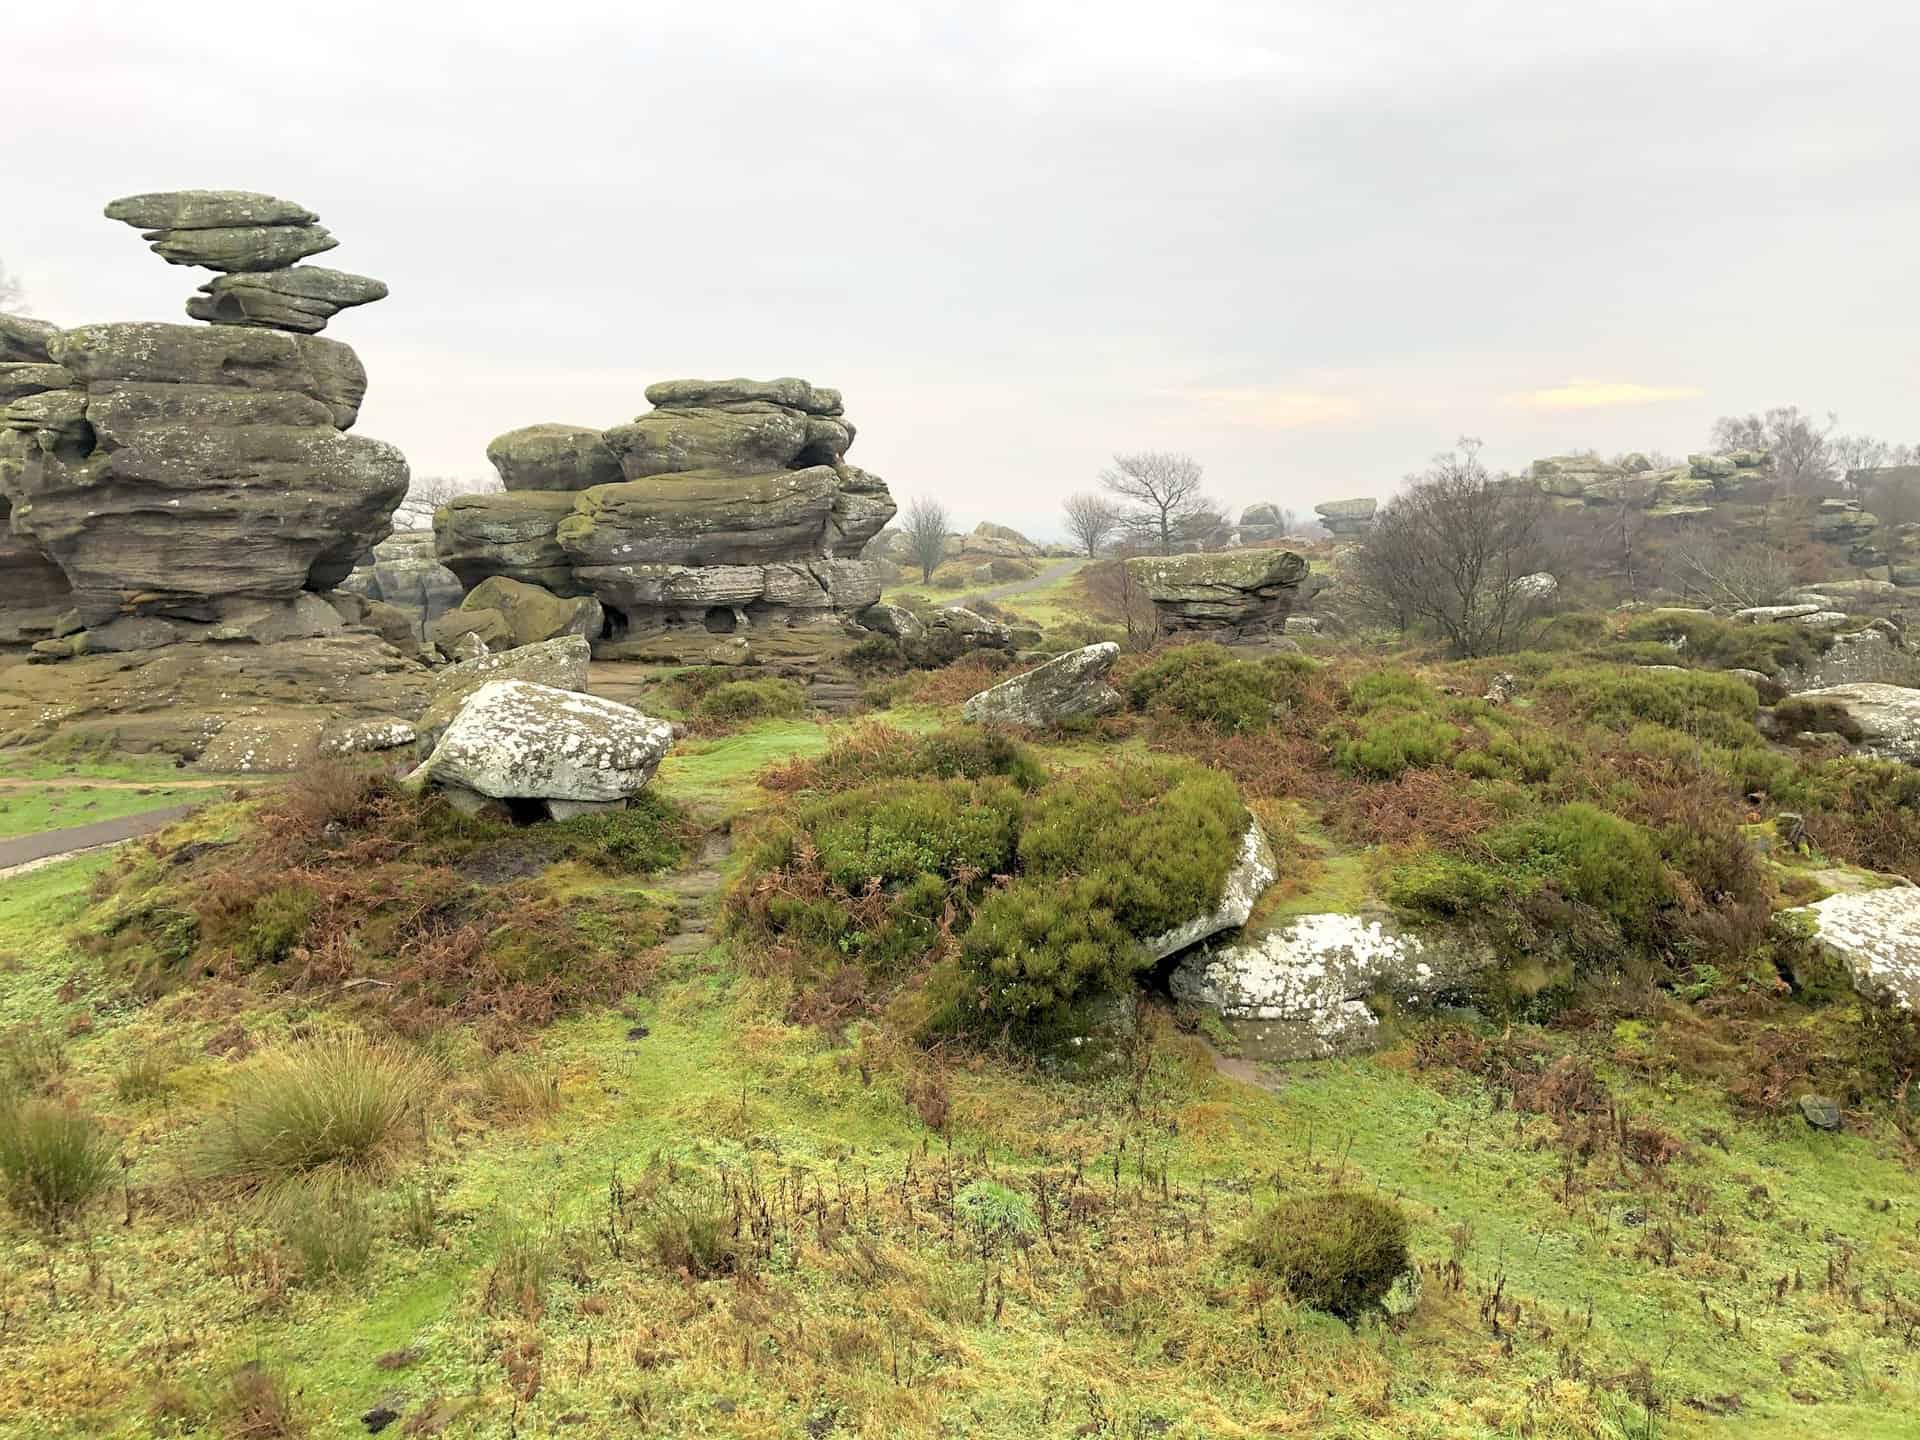 Brimham Rocks in North Yorkshire, notable for their balancing rock formations, standing at nearly 30 feet and situated within the Nidderdale Area of Outstanding Natural Beauty. This is about halfway round this particular Brimham Rocks walk.